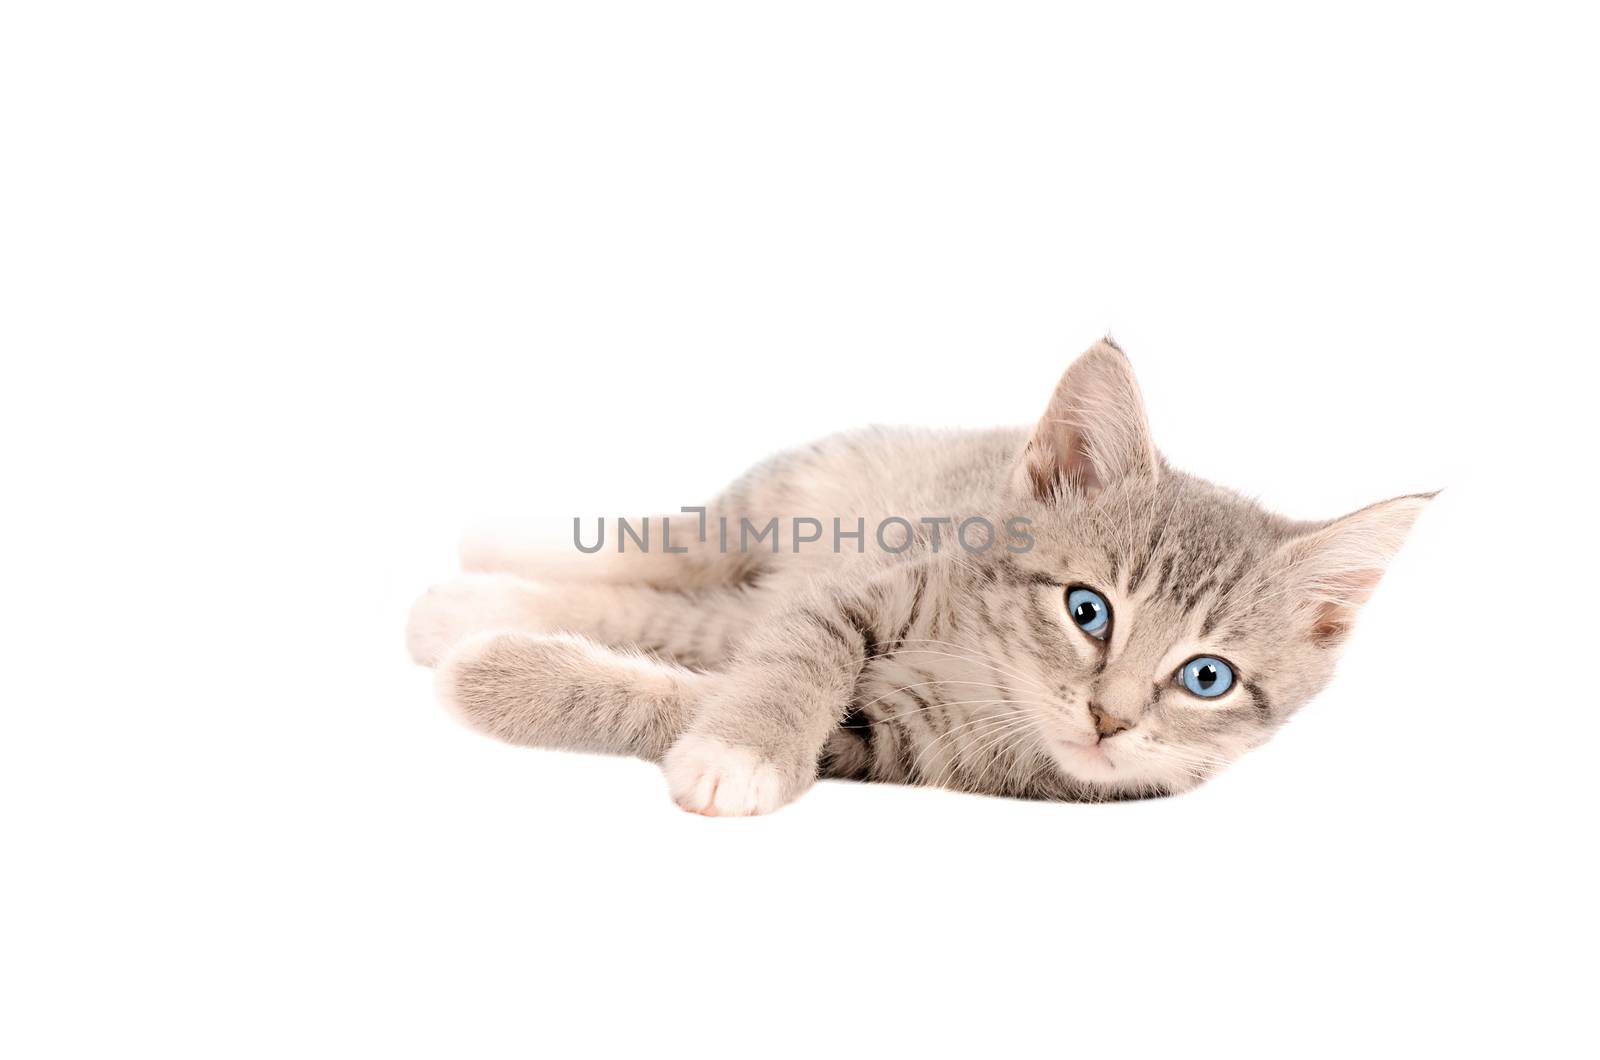 A tabby kitten laying down on white